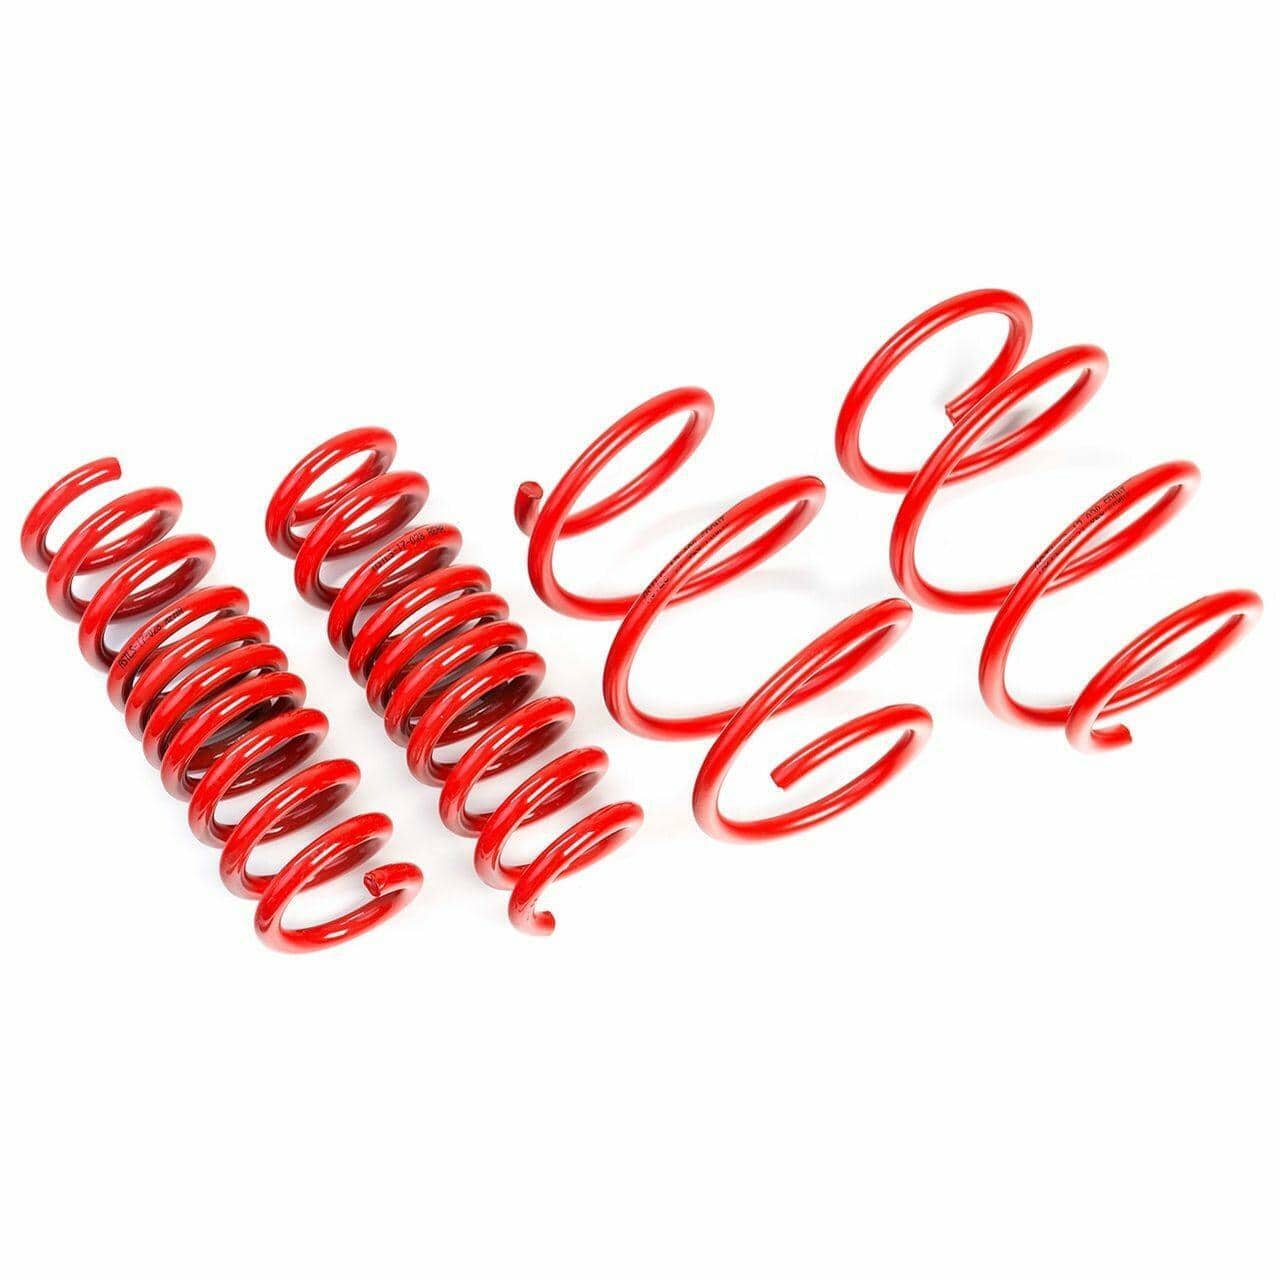 AST Suspension Lowering Springs (45MM/45MM TUV) - 1985-1995 Mercedes-Benz 200 250D Turbo/260E/280E/300D Coupe (W124/C) ASTLS-14-1190